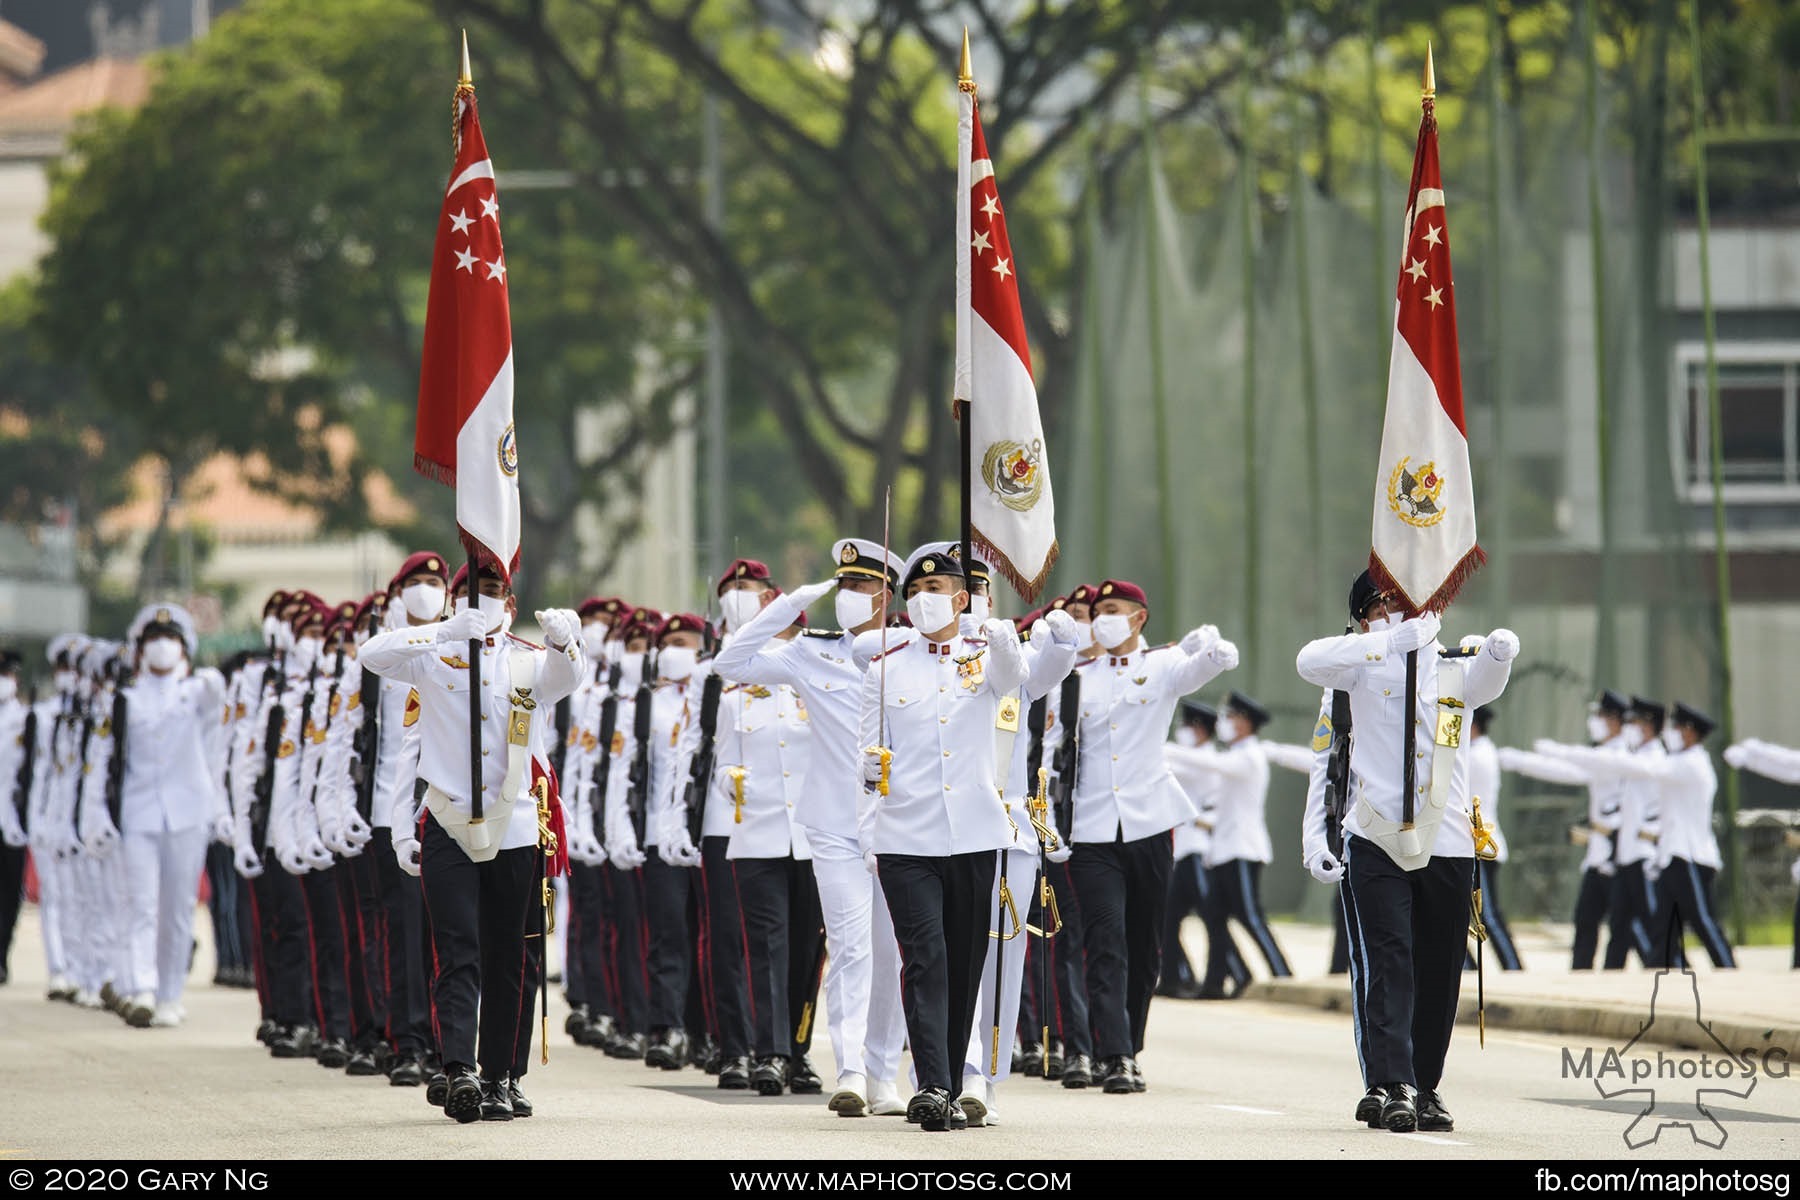 Lieutenant-Colonel (LTC) Nicholas Ong, Parade Commander, marches off the contingents at the Parade@Padang.